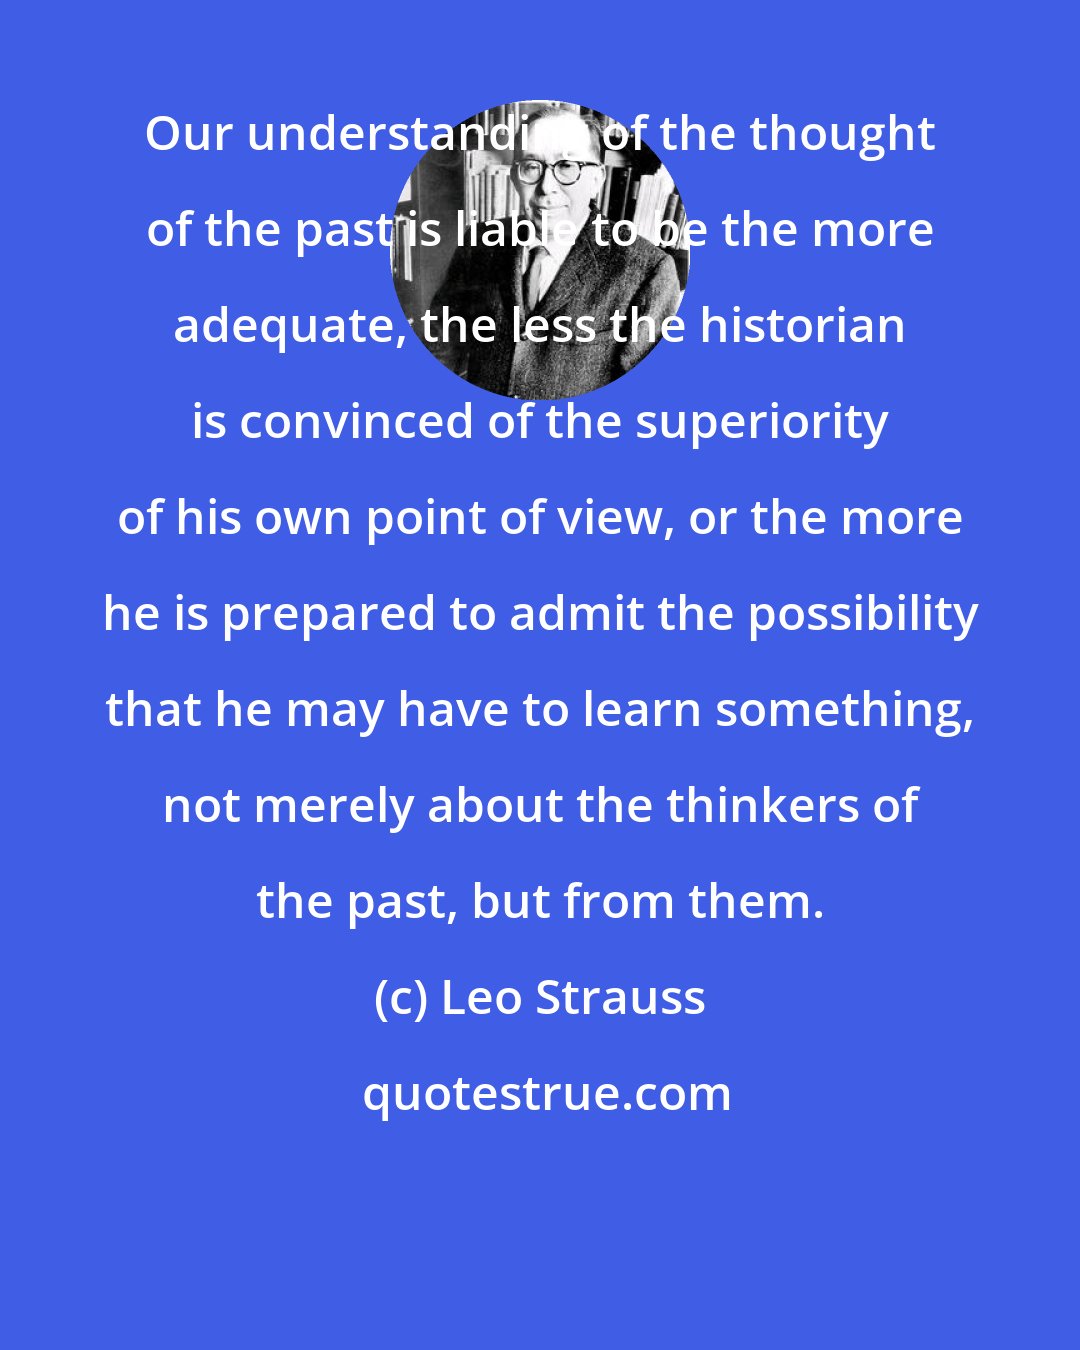 Leo Strauss: Our understanding of the thought of the past is liable to be the more adequate, the less the historian is convinced of the superiority of his own point of view, or the more he is prepared to admit the possibility that he may have to learn something, not merely about the thinkers of the past, but from them.